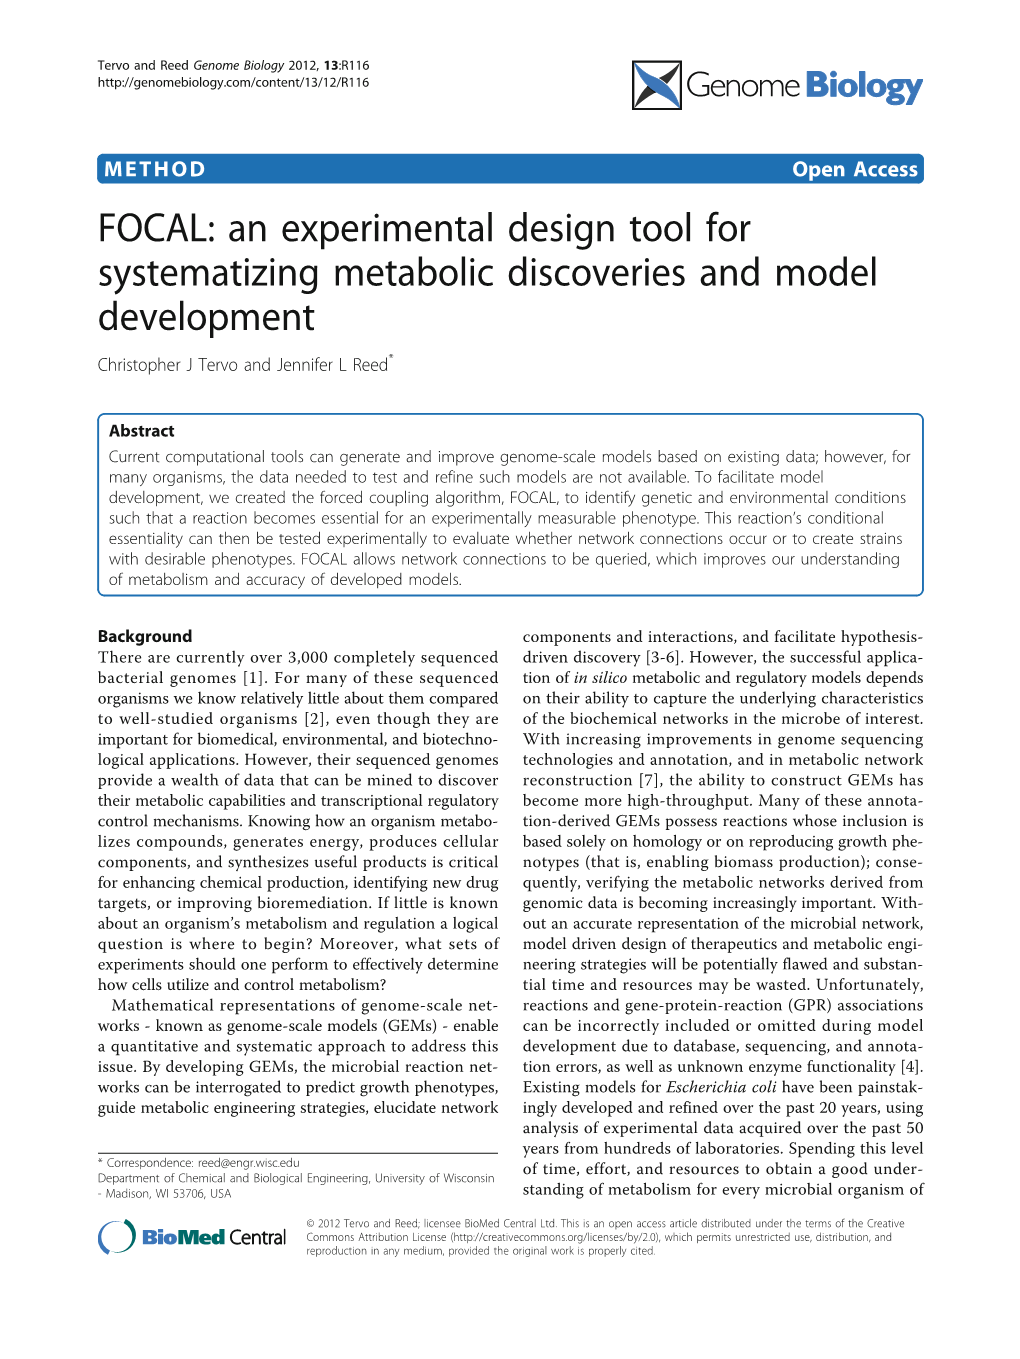 An Experimental Design Tool for Systematizing Metabolic Discoveries and Model Development Christopher J Tervo and Jennifer L Reed*